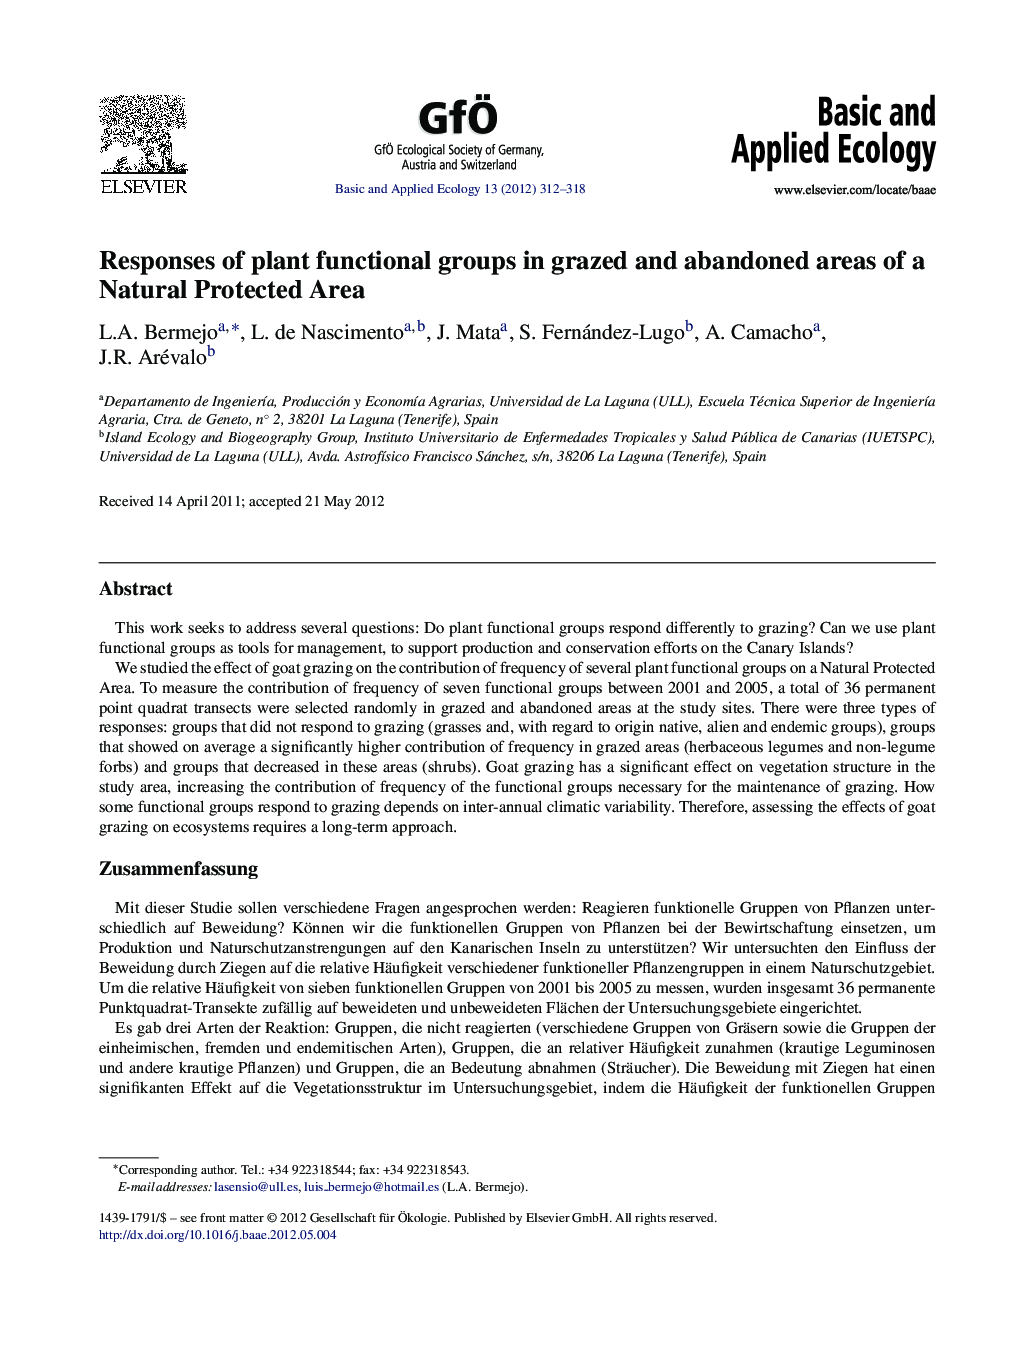 Responses of plant functional groups in grazed and abandoned areas of a Natural Protected Area